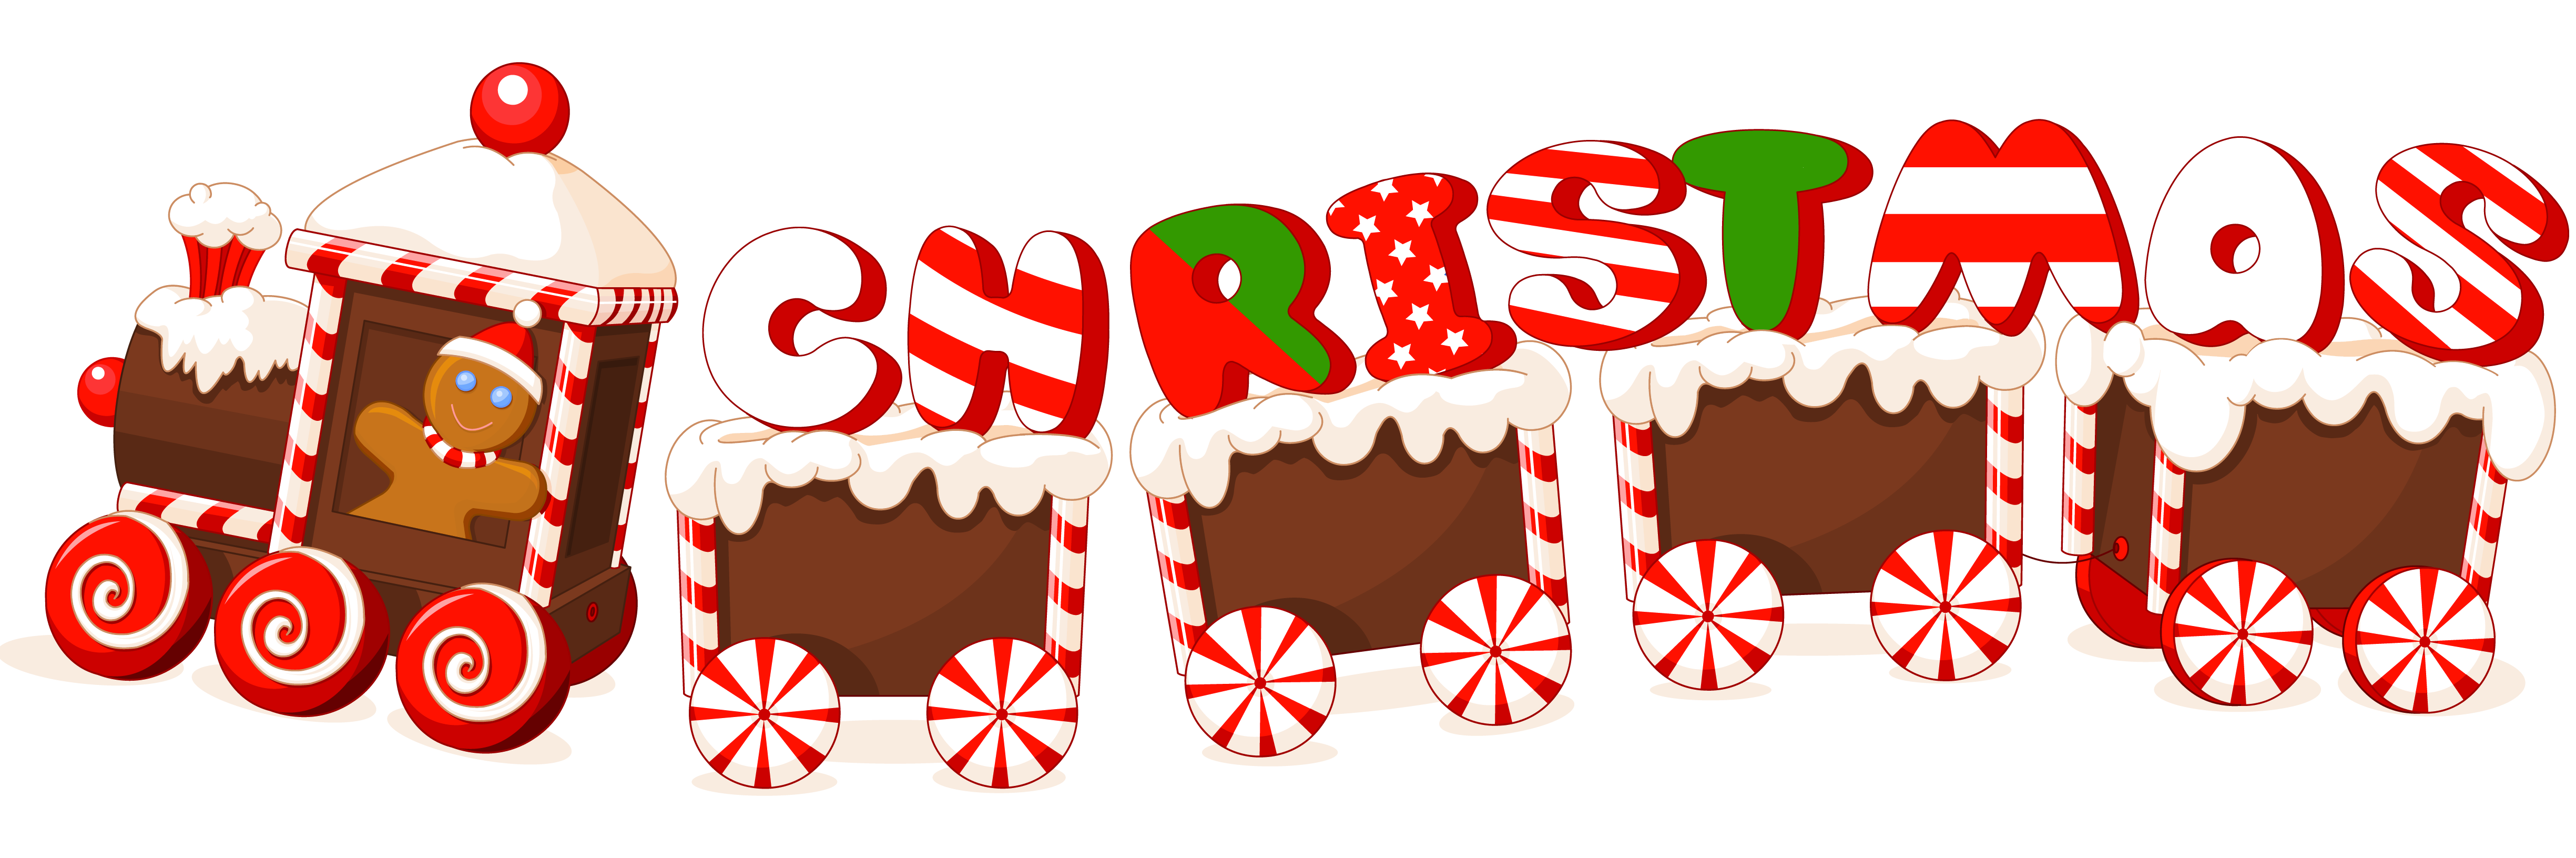 Merry Christmas With Sweet Tr - Christmas Clipart Banners